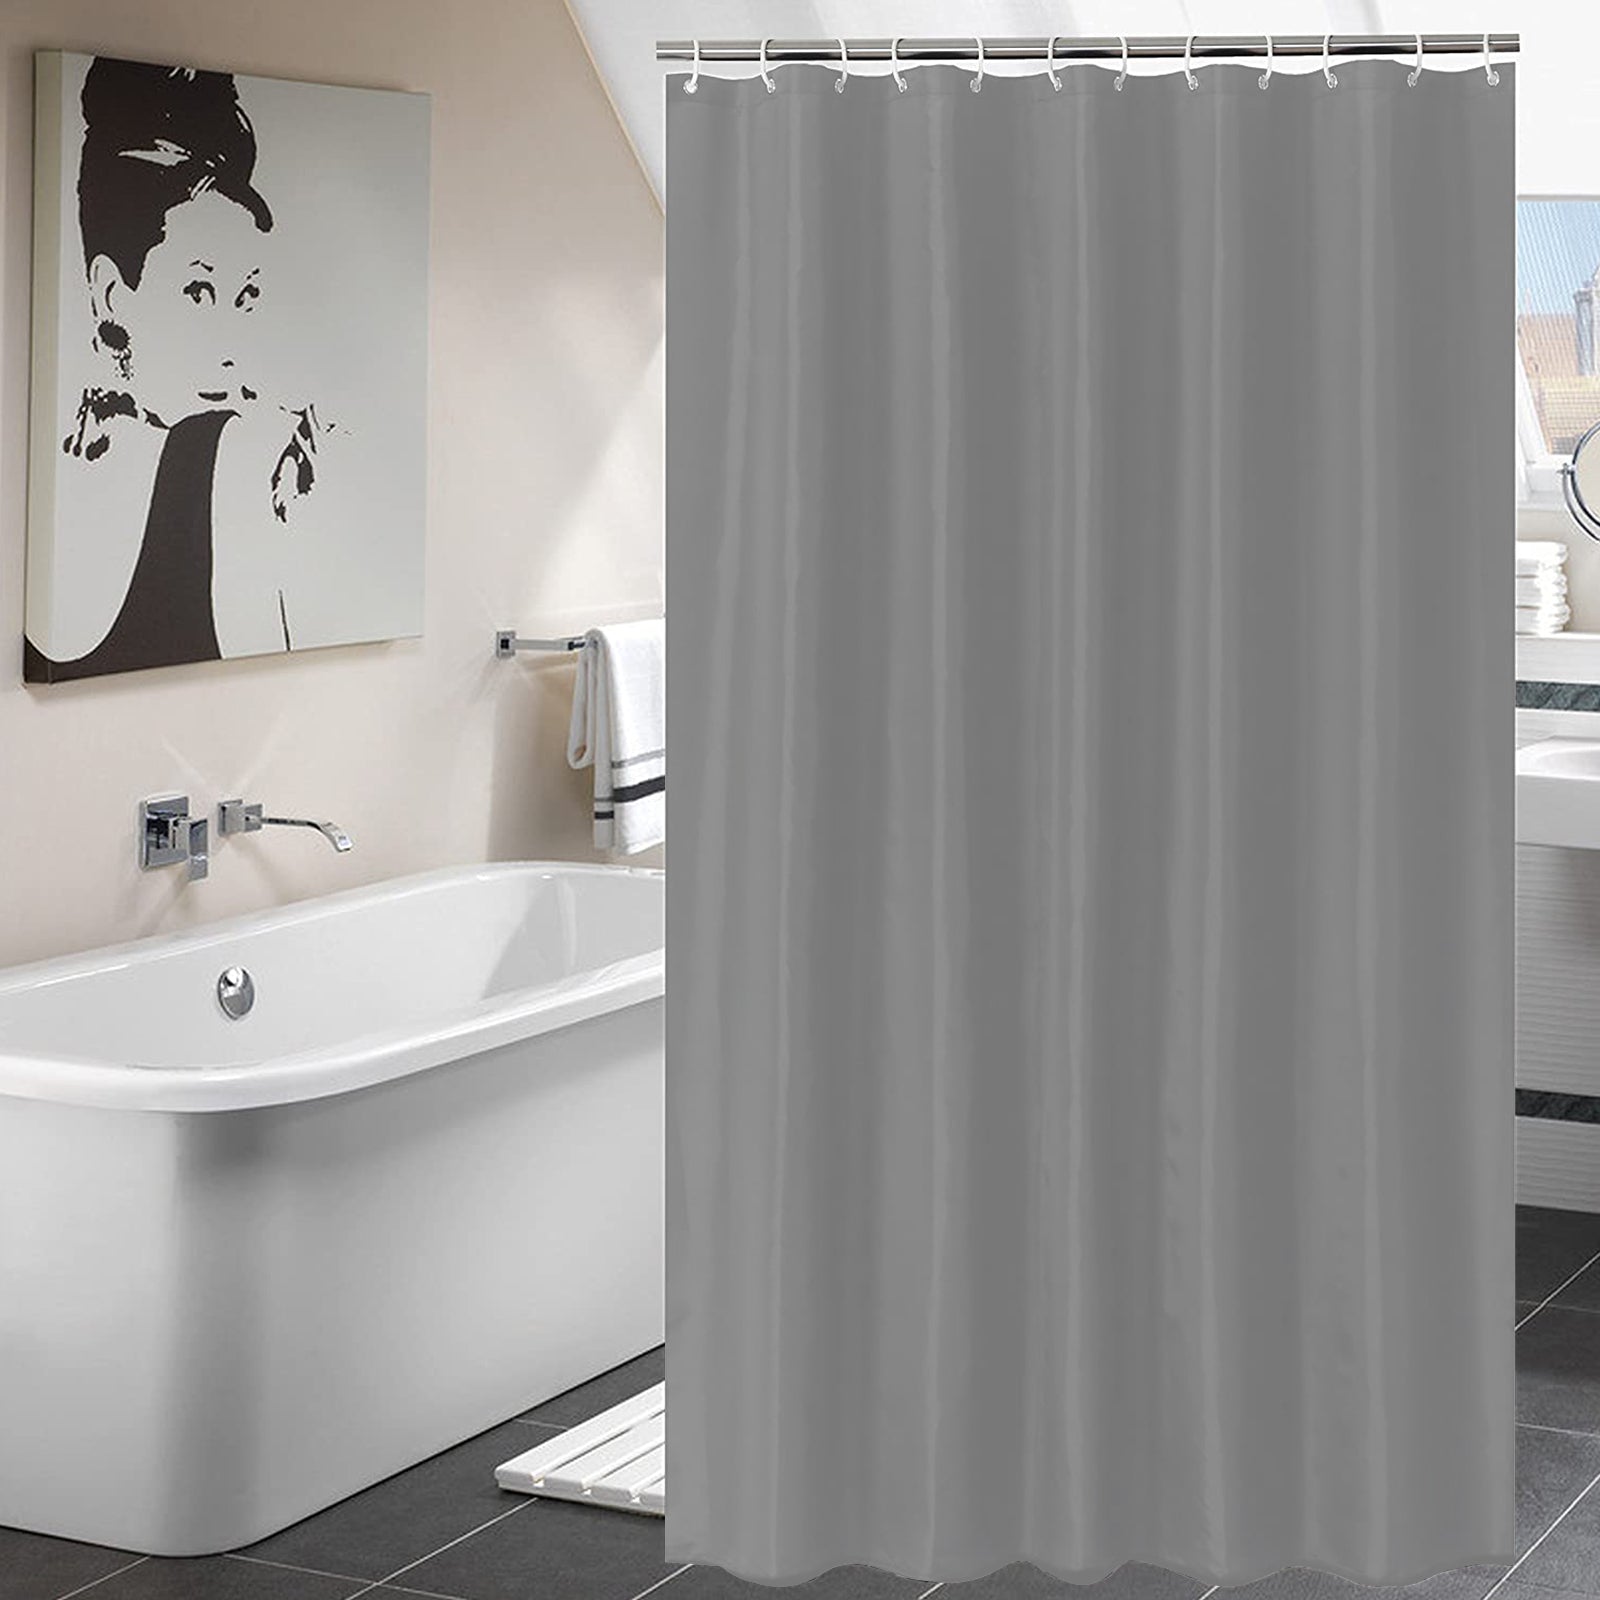 Akarise Fabric Shower Curtain with Rust-Resistant Metal Grommets